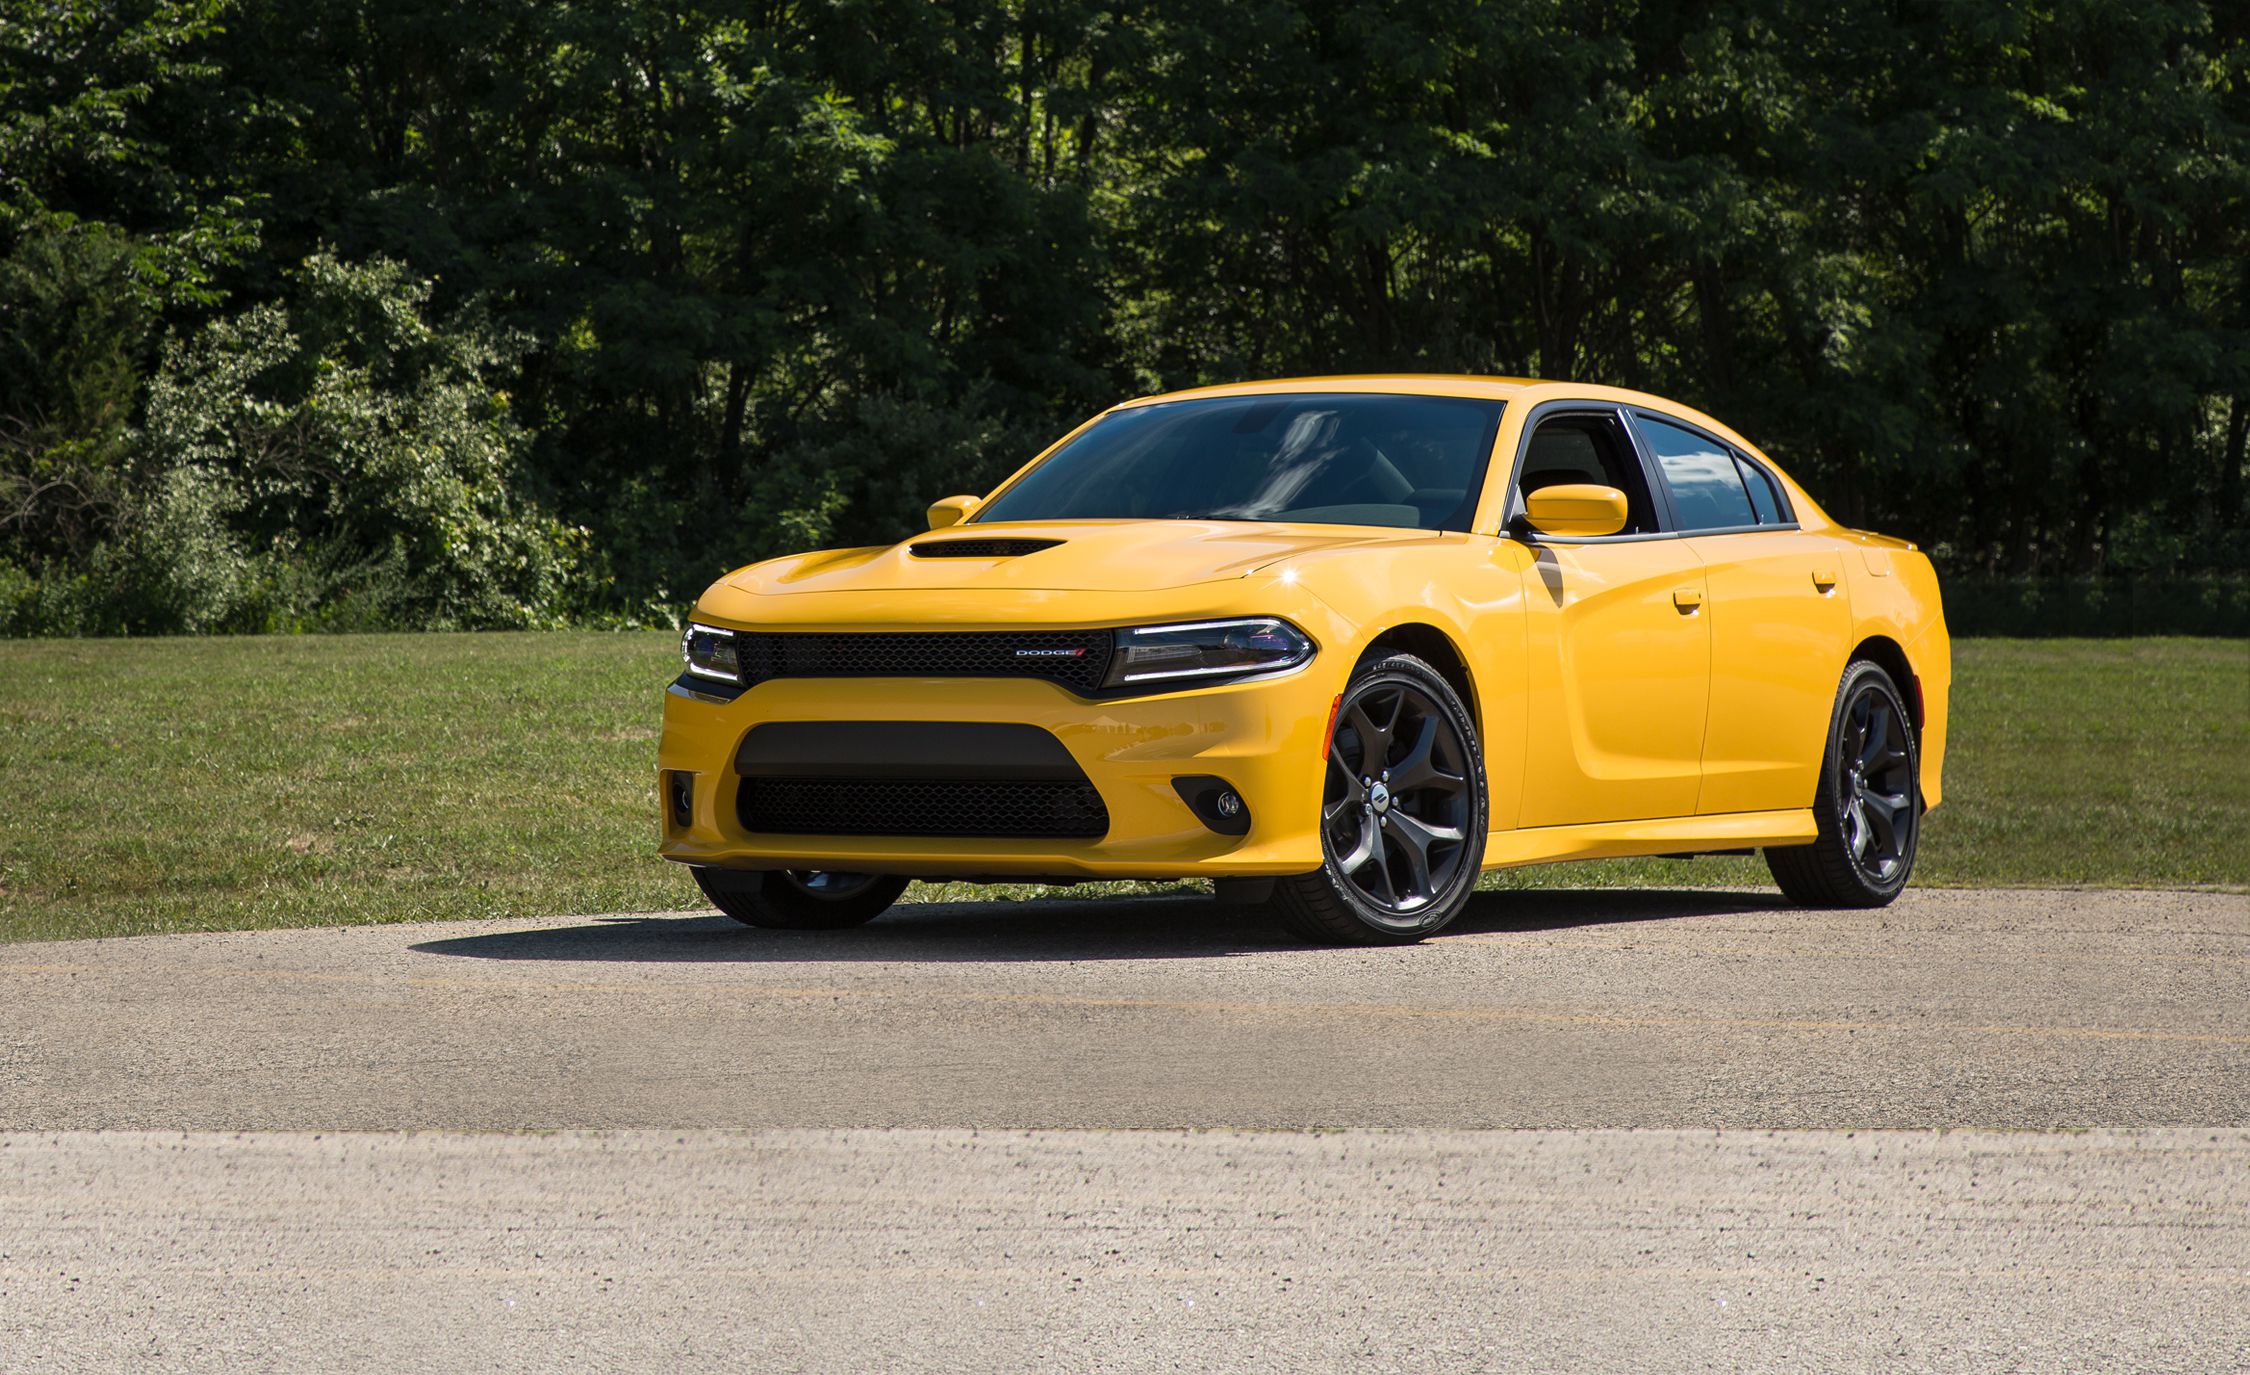 2015 Dodge Charger SRT Hellcat Test | Review | Car and Driver